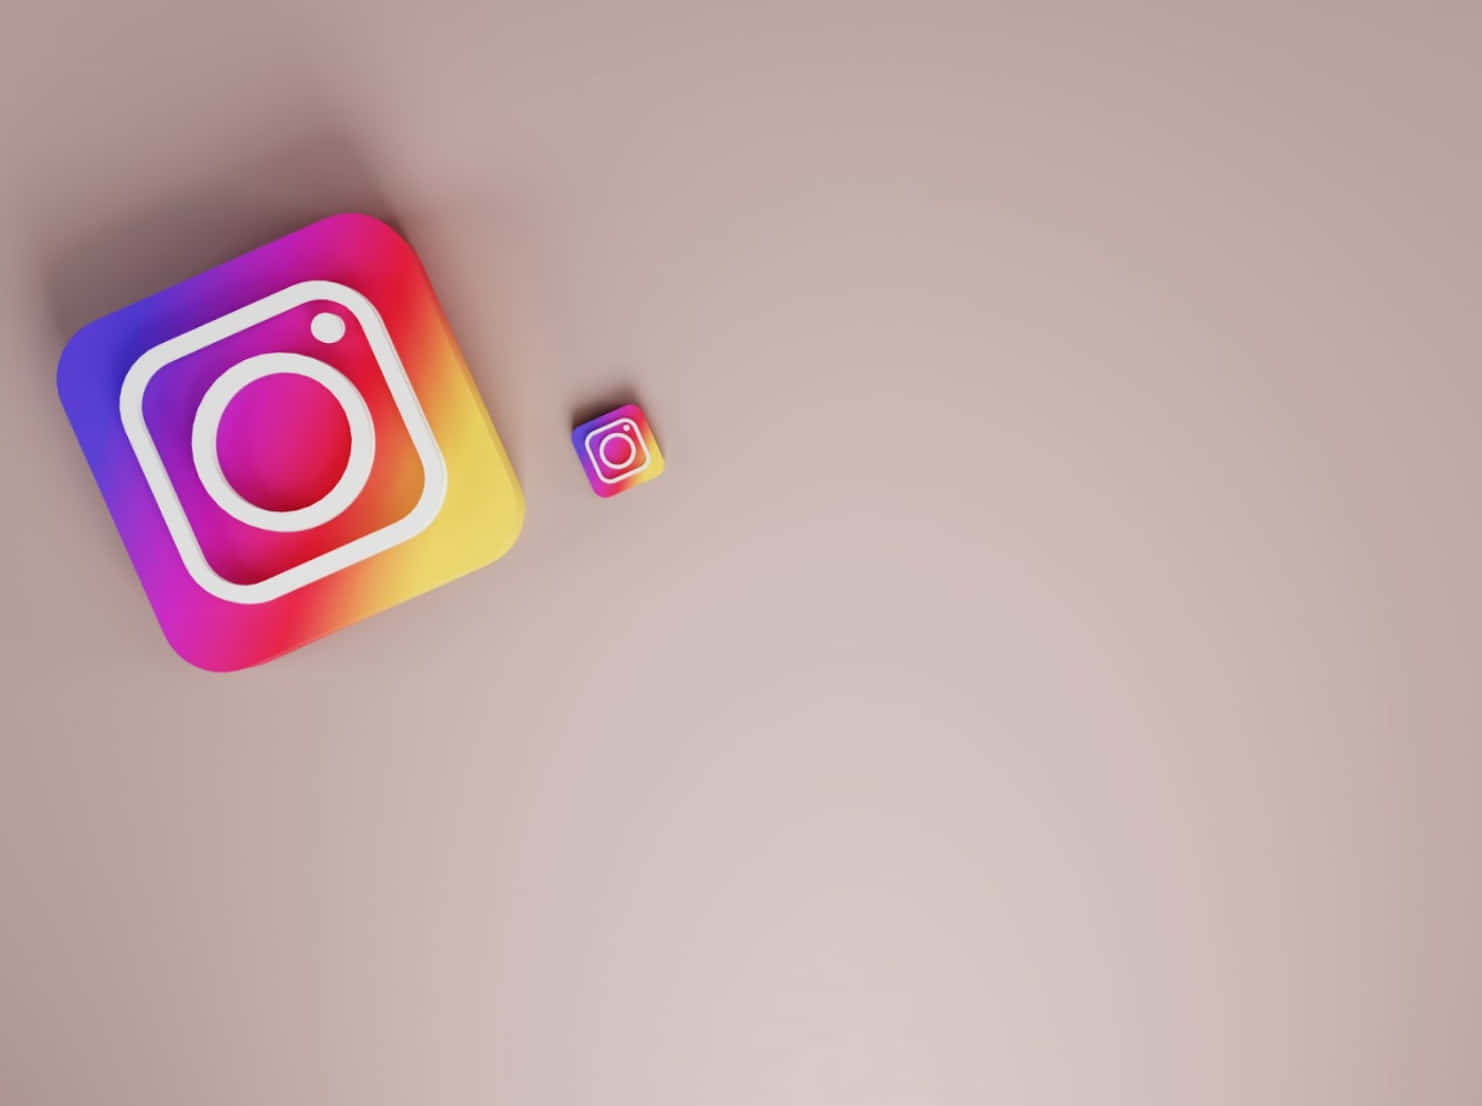 Instagram Icon And A Small Square On A Beige Background